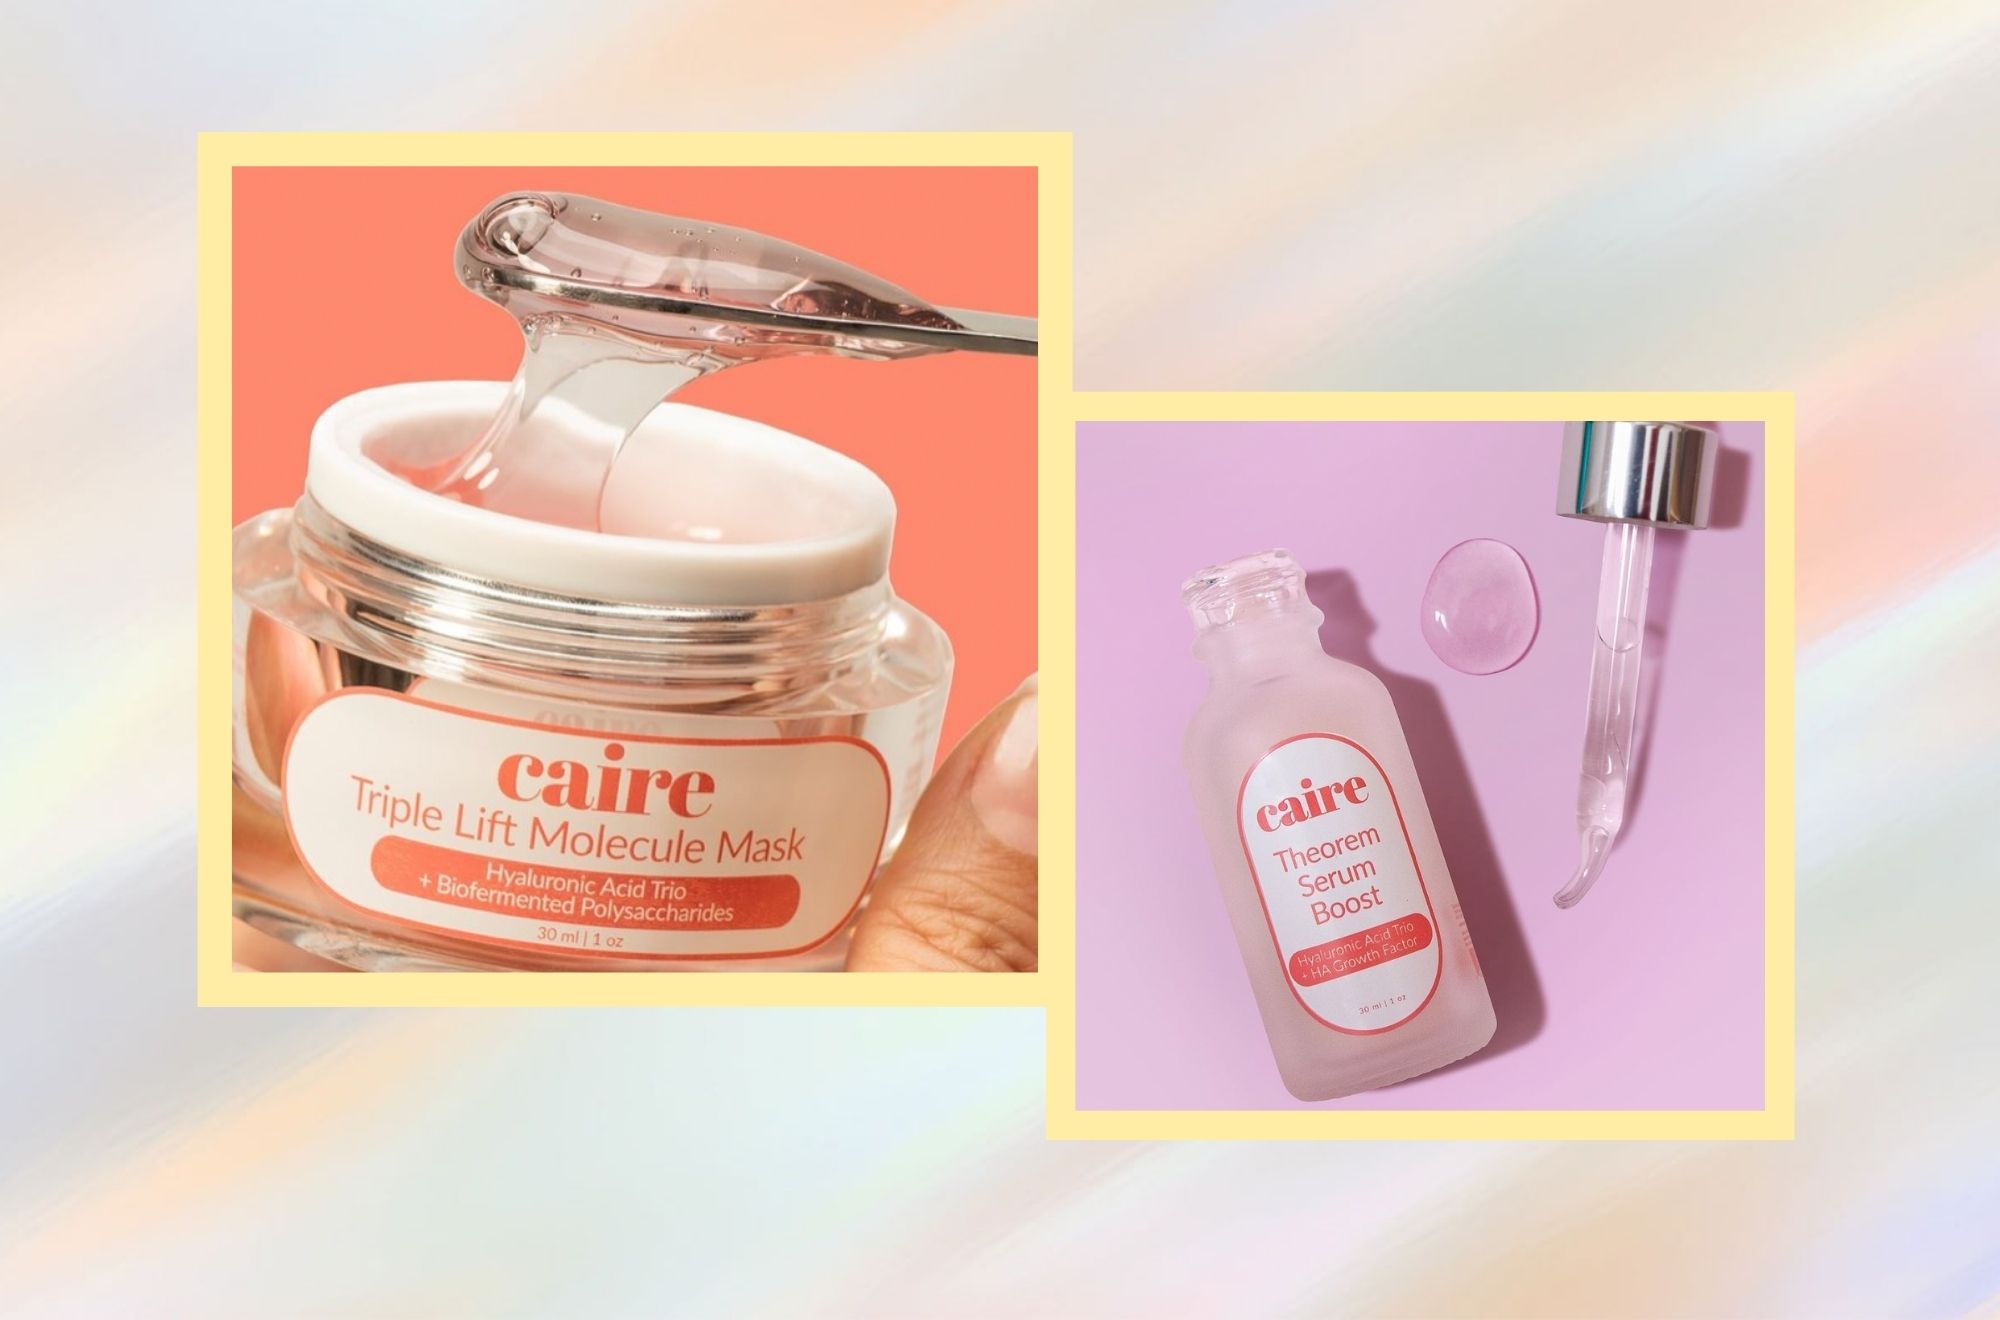 Photos of Caire Beauty products on a multicolored background